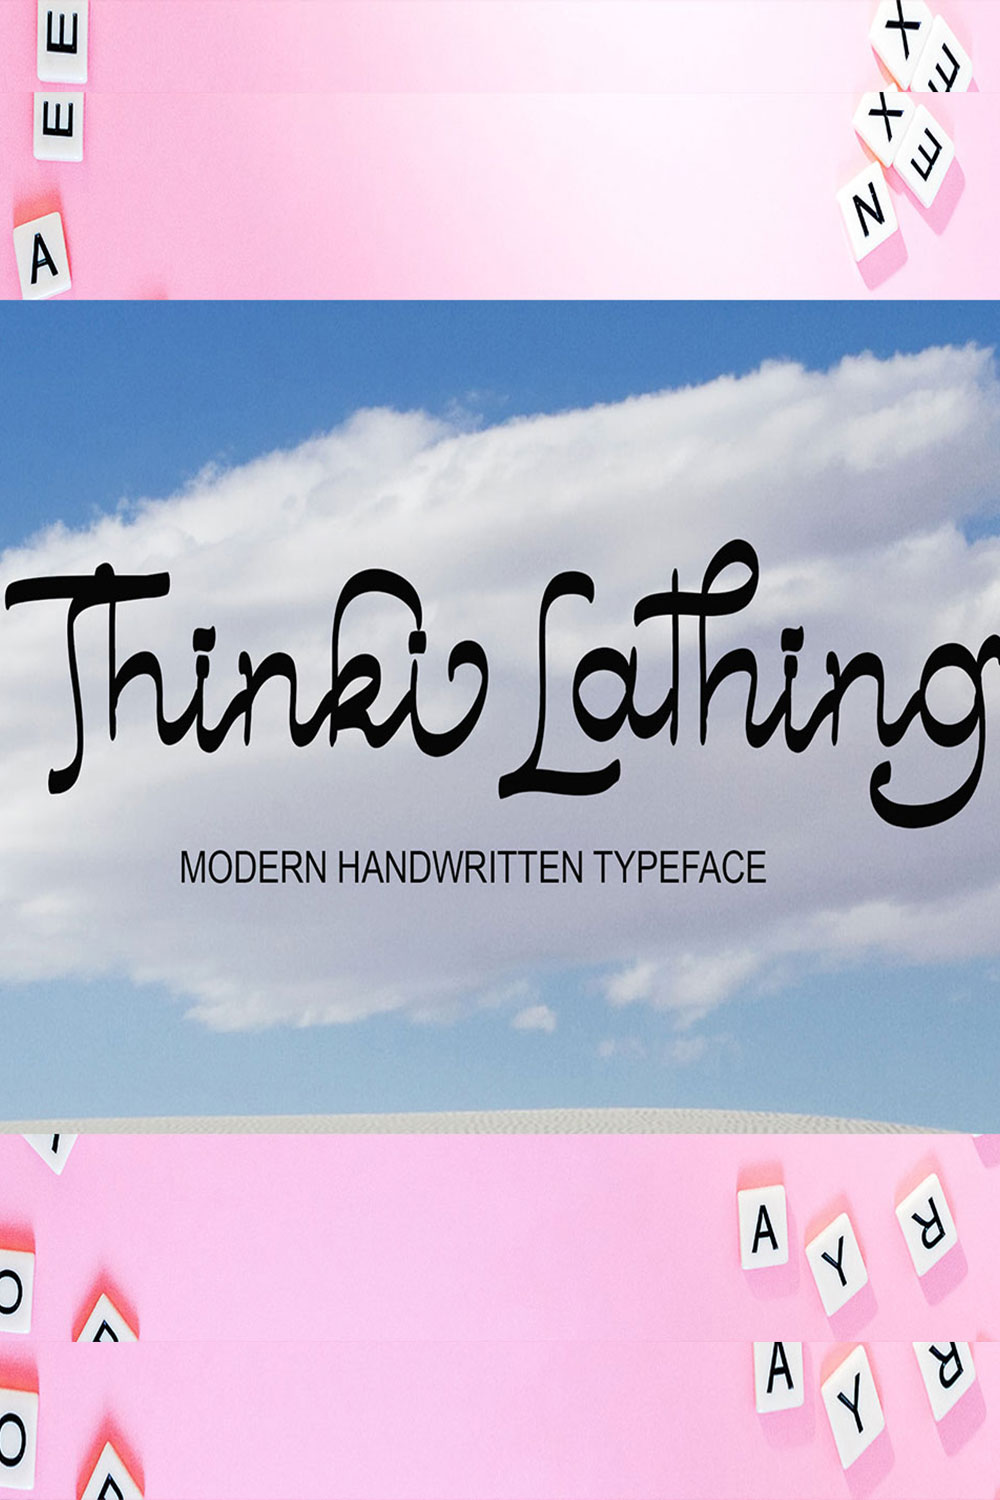 An image with text showing the beautiful Thinki Lathing font.